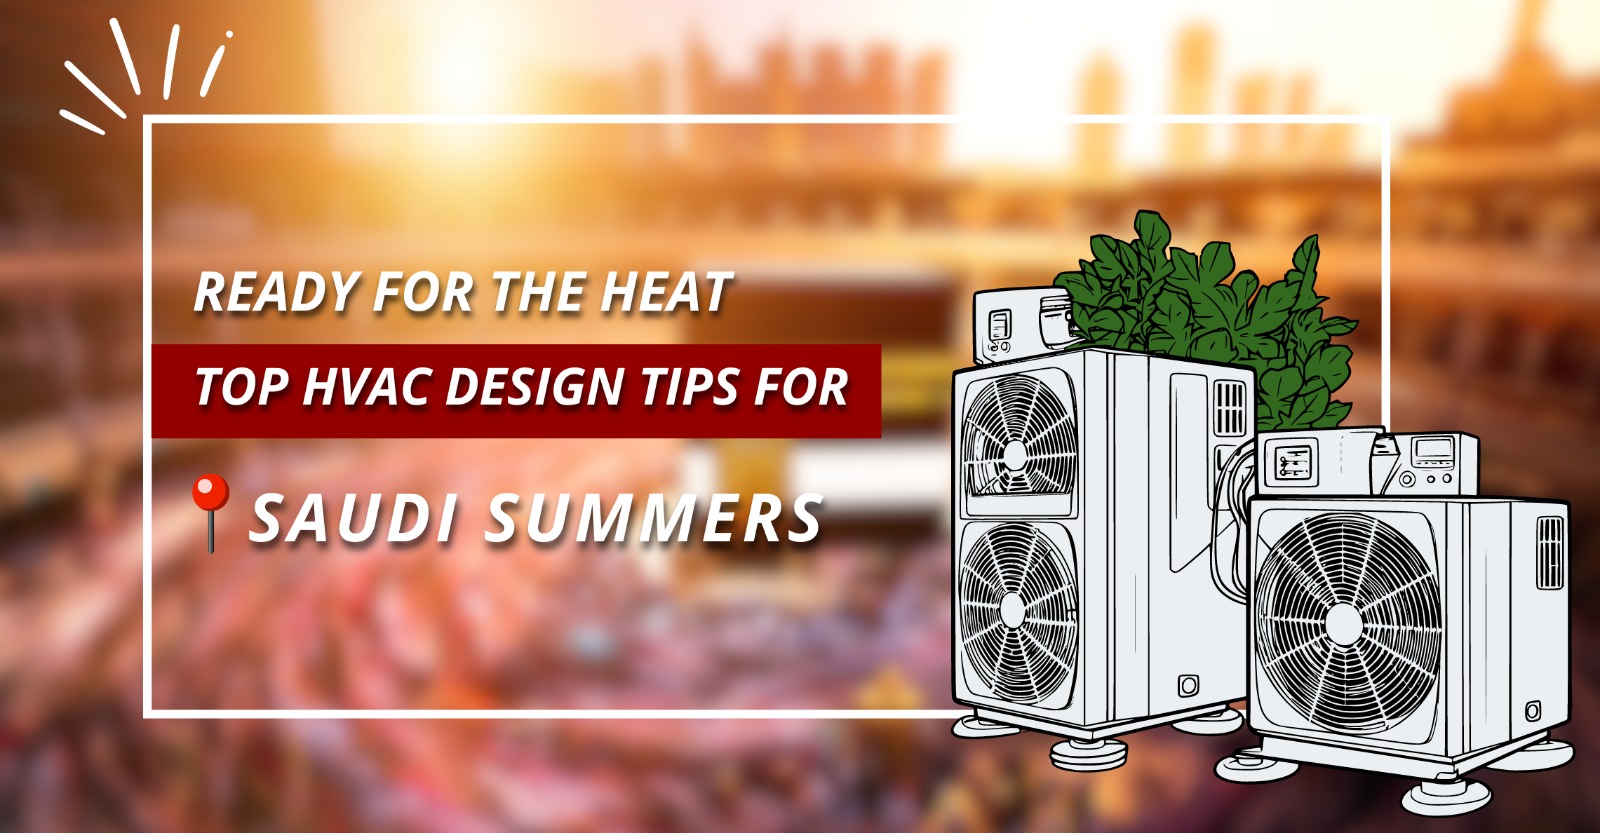 Ready for the Heat: Top HVAC Design Tips for Saudi Summers